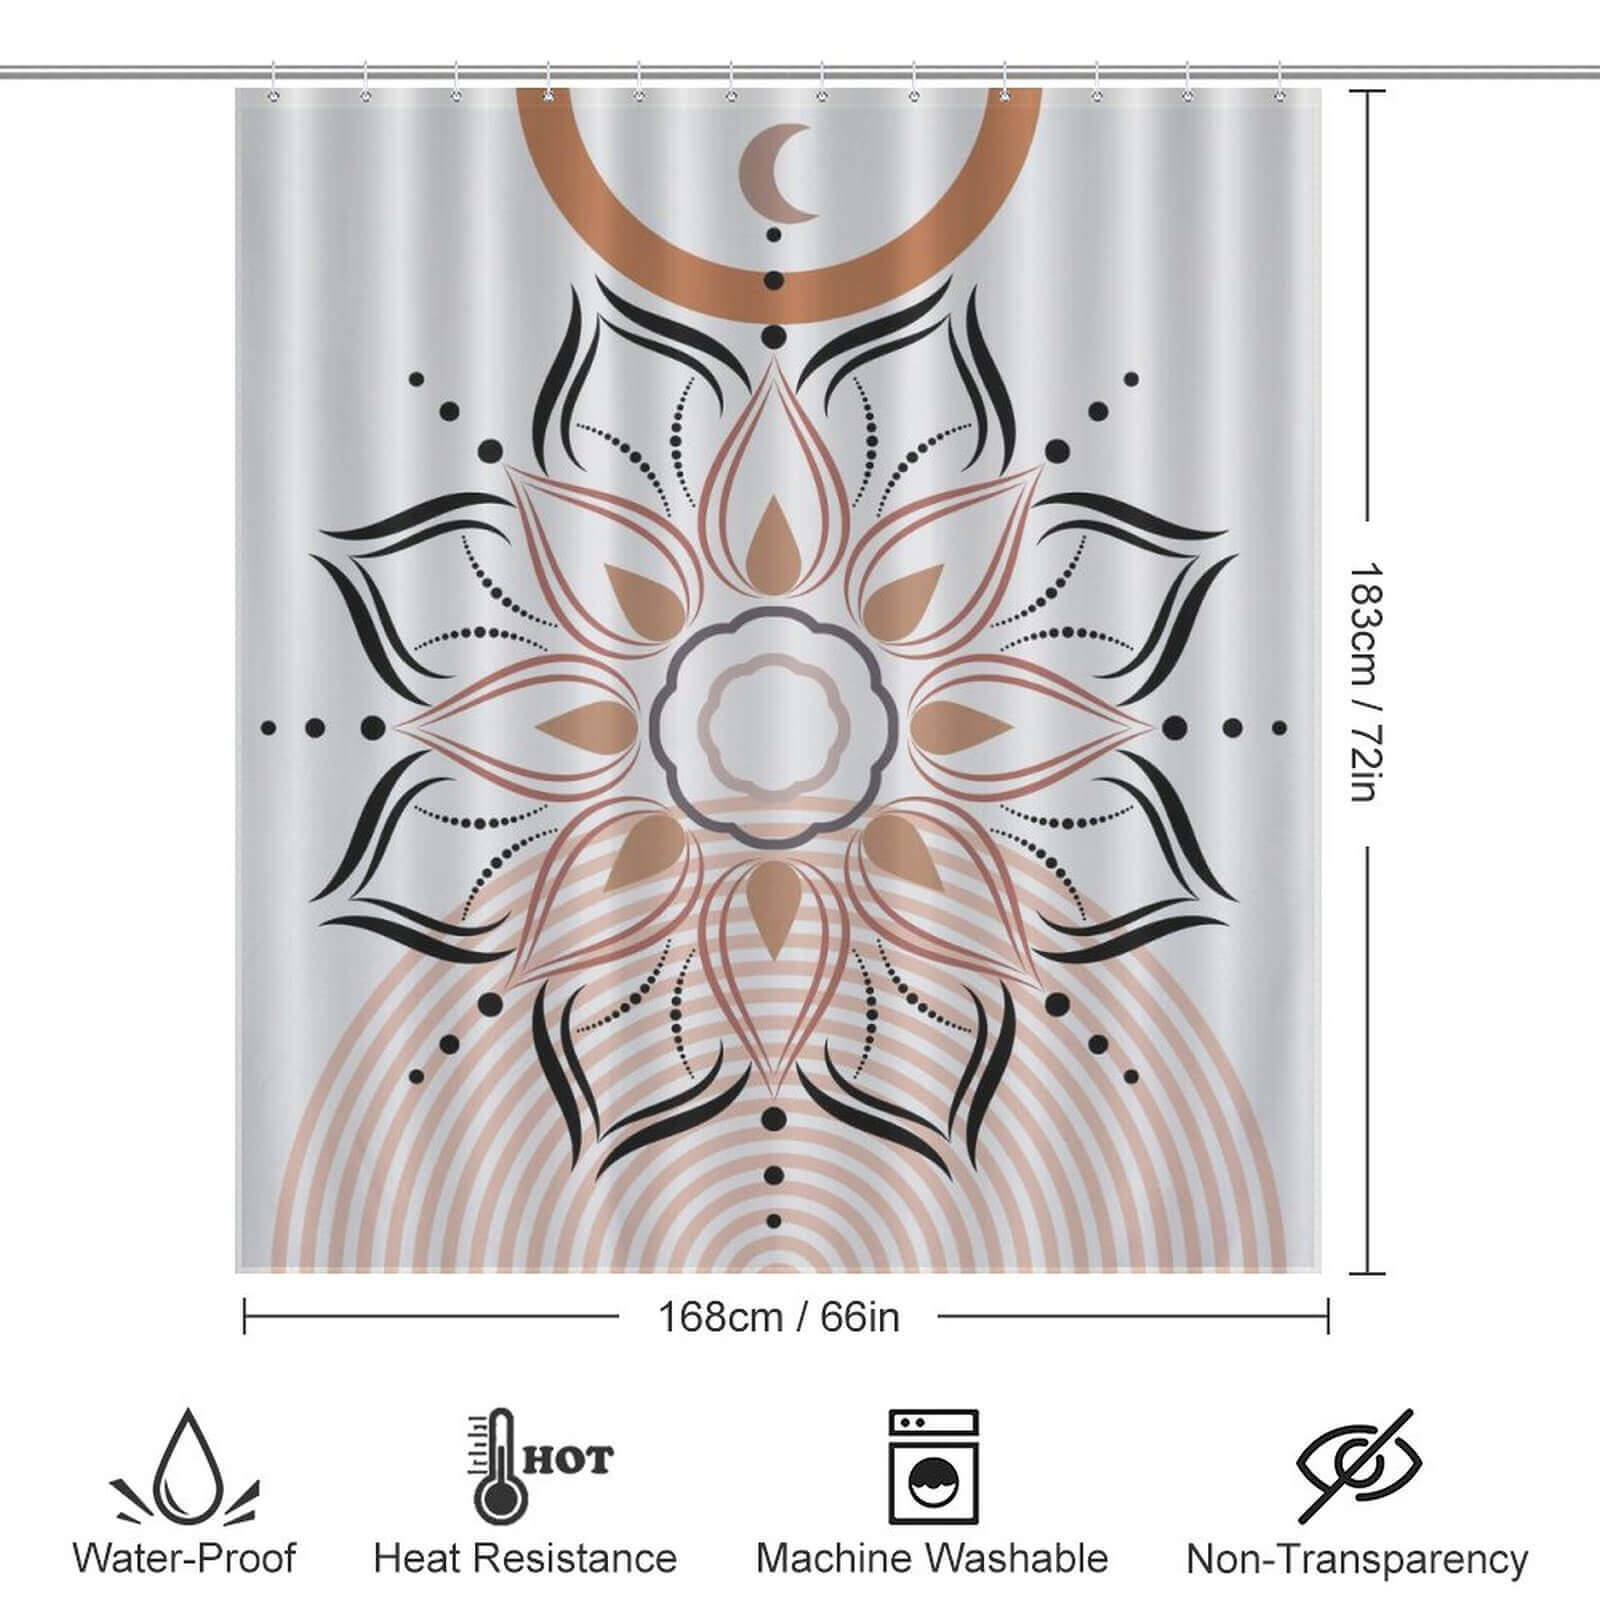 Give your bathroom a serene and elegant touch with this Boho Mandala shower curtain by Cotton Cat. The beautiful design of the lotus flower adds a calming and natural vibe to your bathroom decor. A perfect addition.